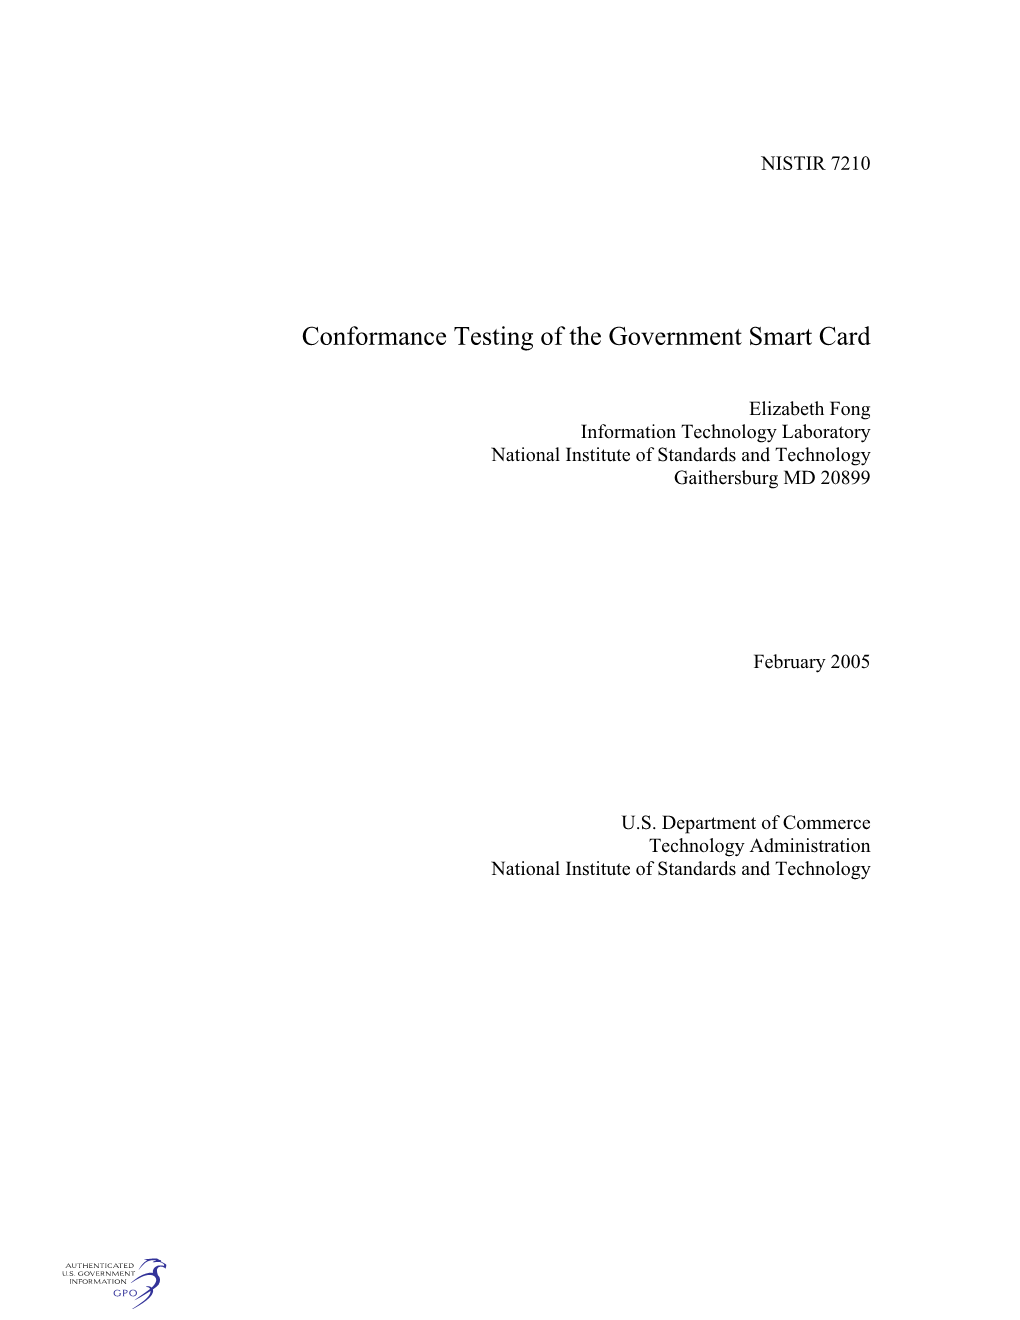 Conformance Testing of the Government Smart Card